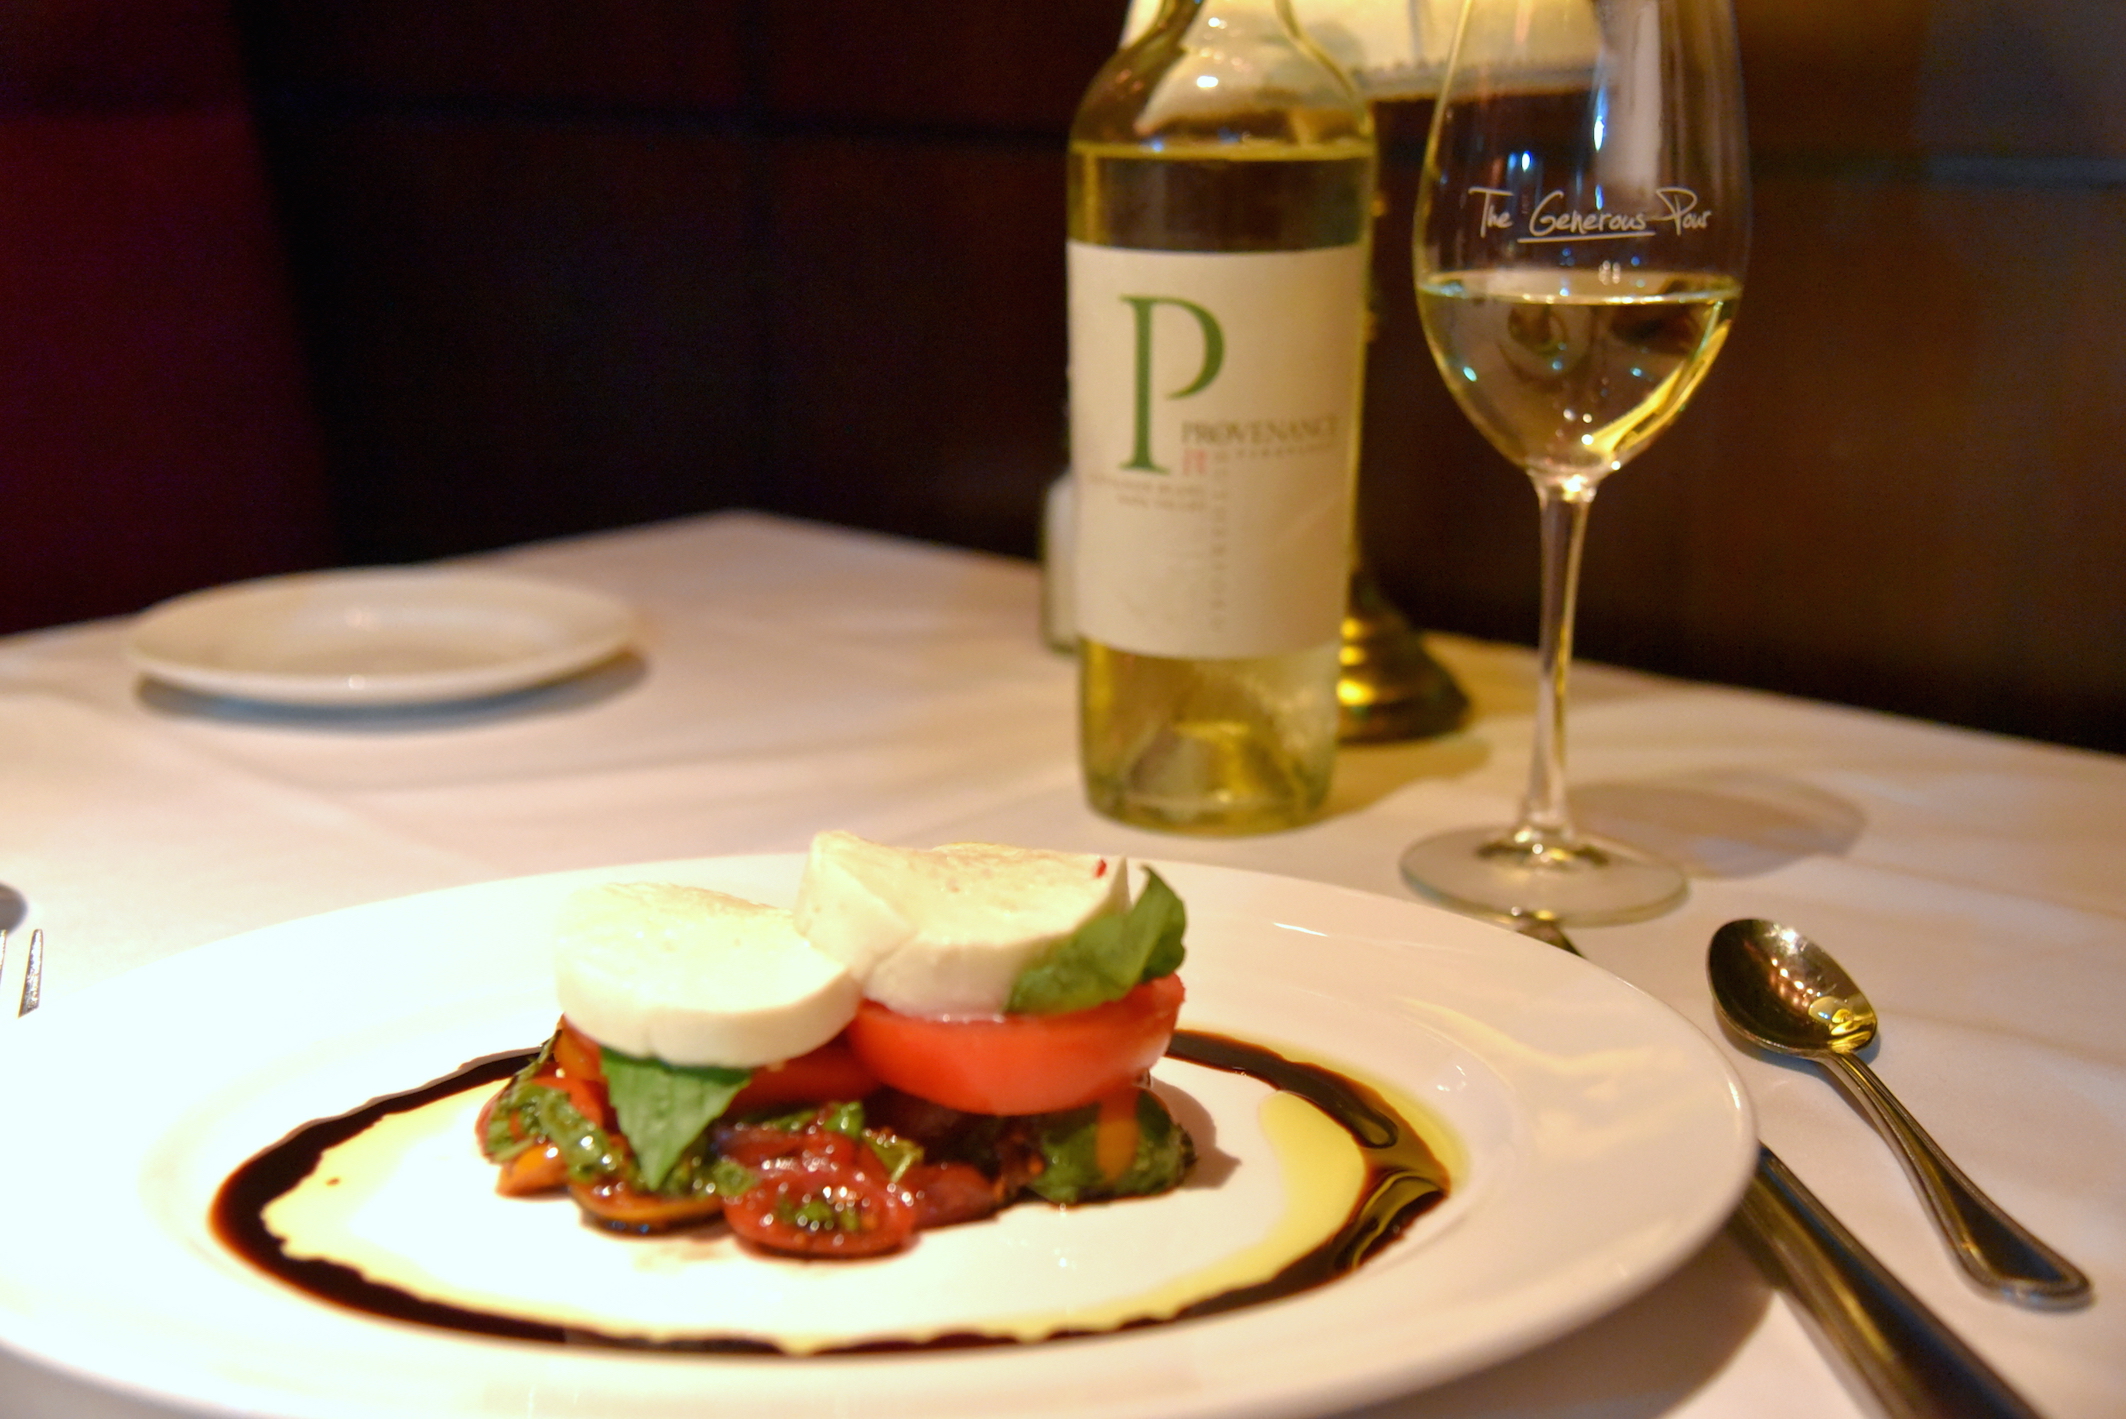 Homemade mozzarella at the Capital Grille NYC